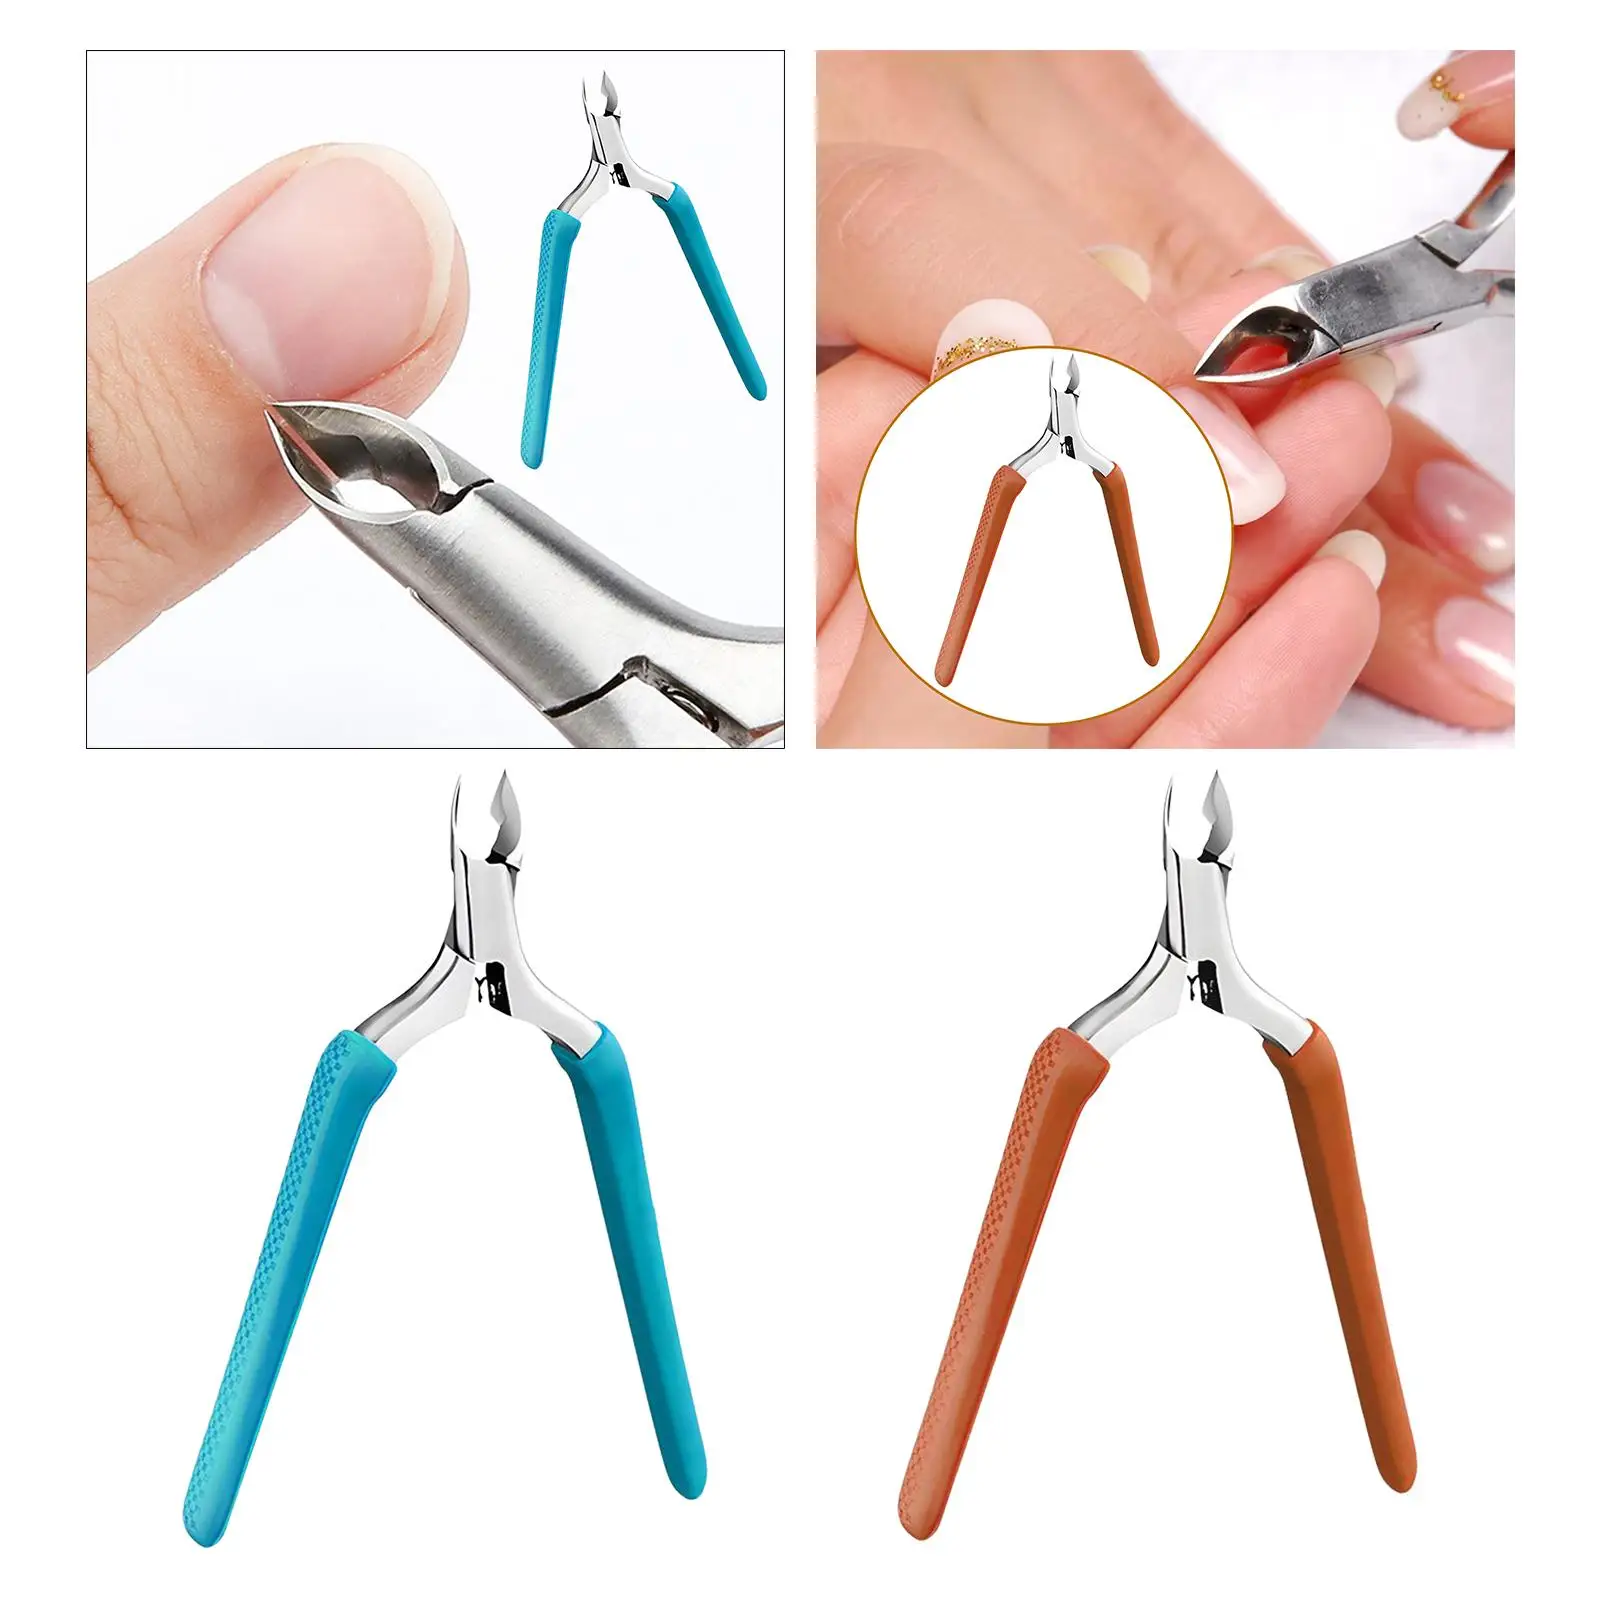 Cuticle Nipper Nail Scissors Cuticle Remover Manicure Tool Strong Dry Skin Remover Cuticle Trimmer for Manicure and Pedicure